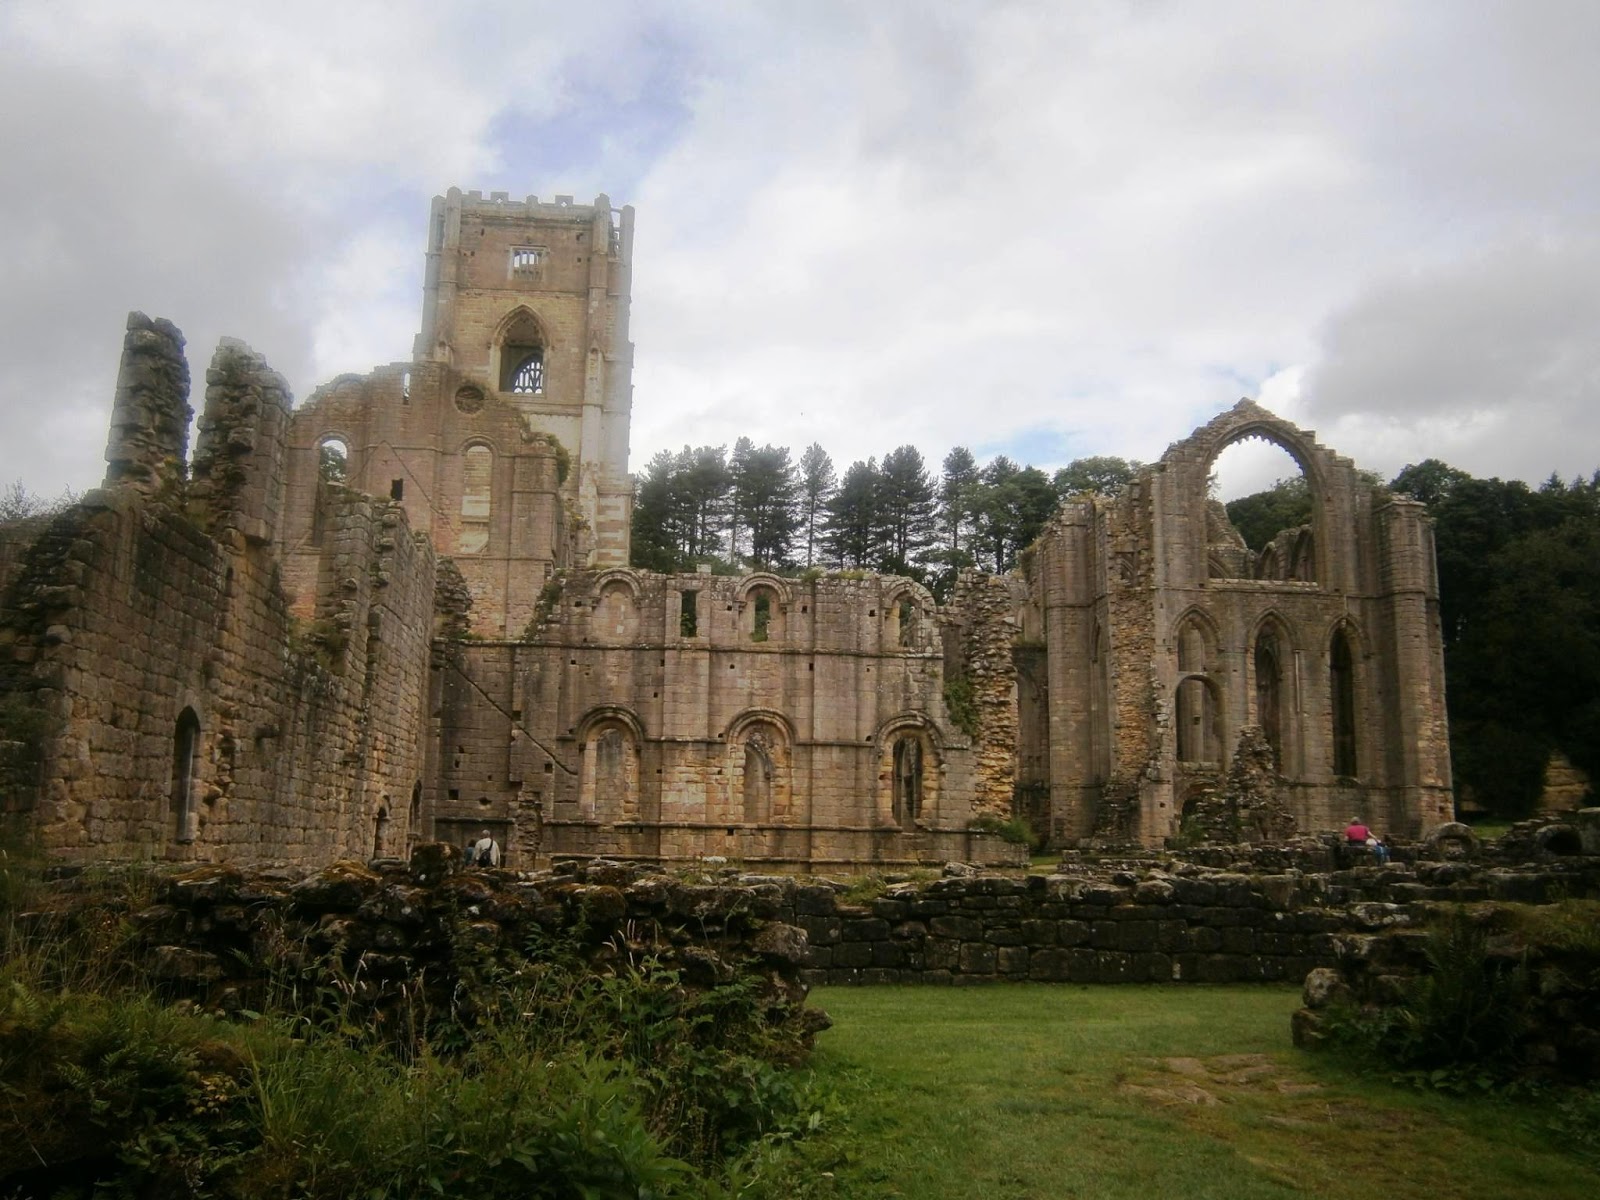 Liberal England: Fountains Abbey